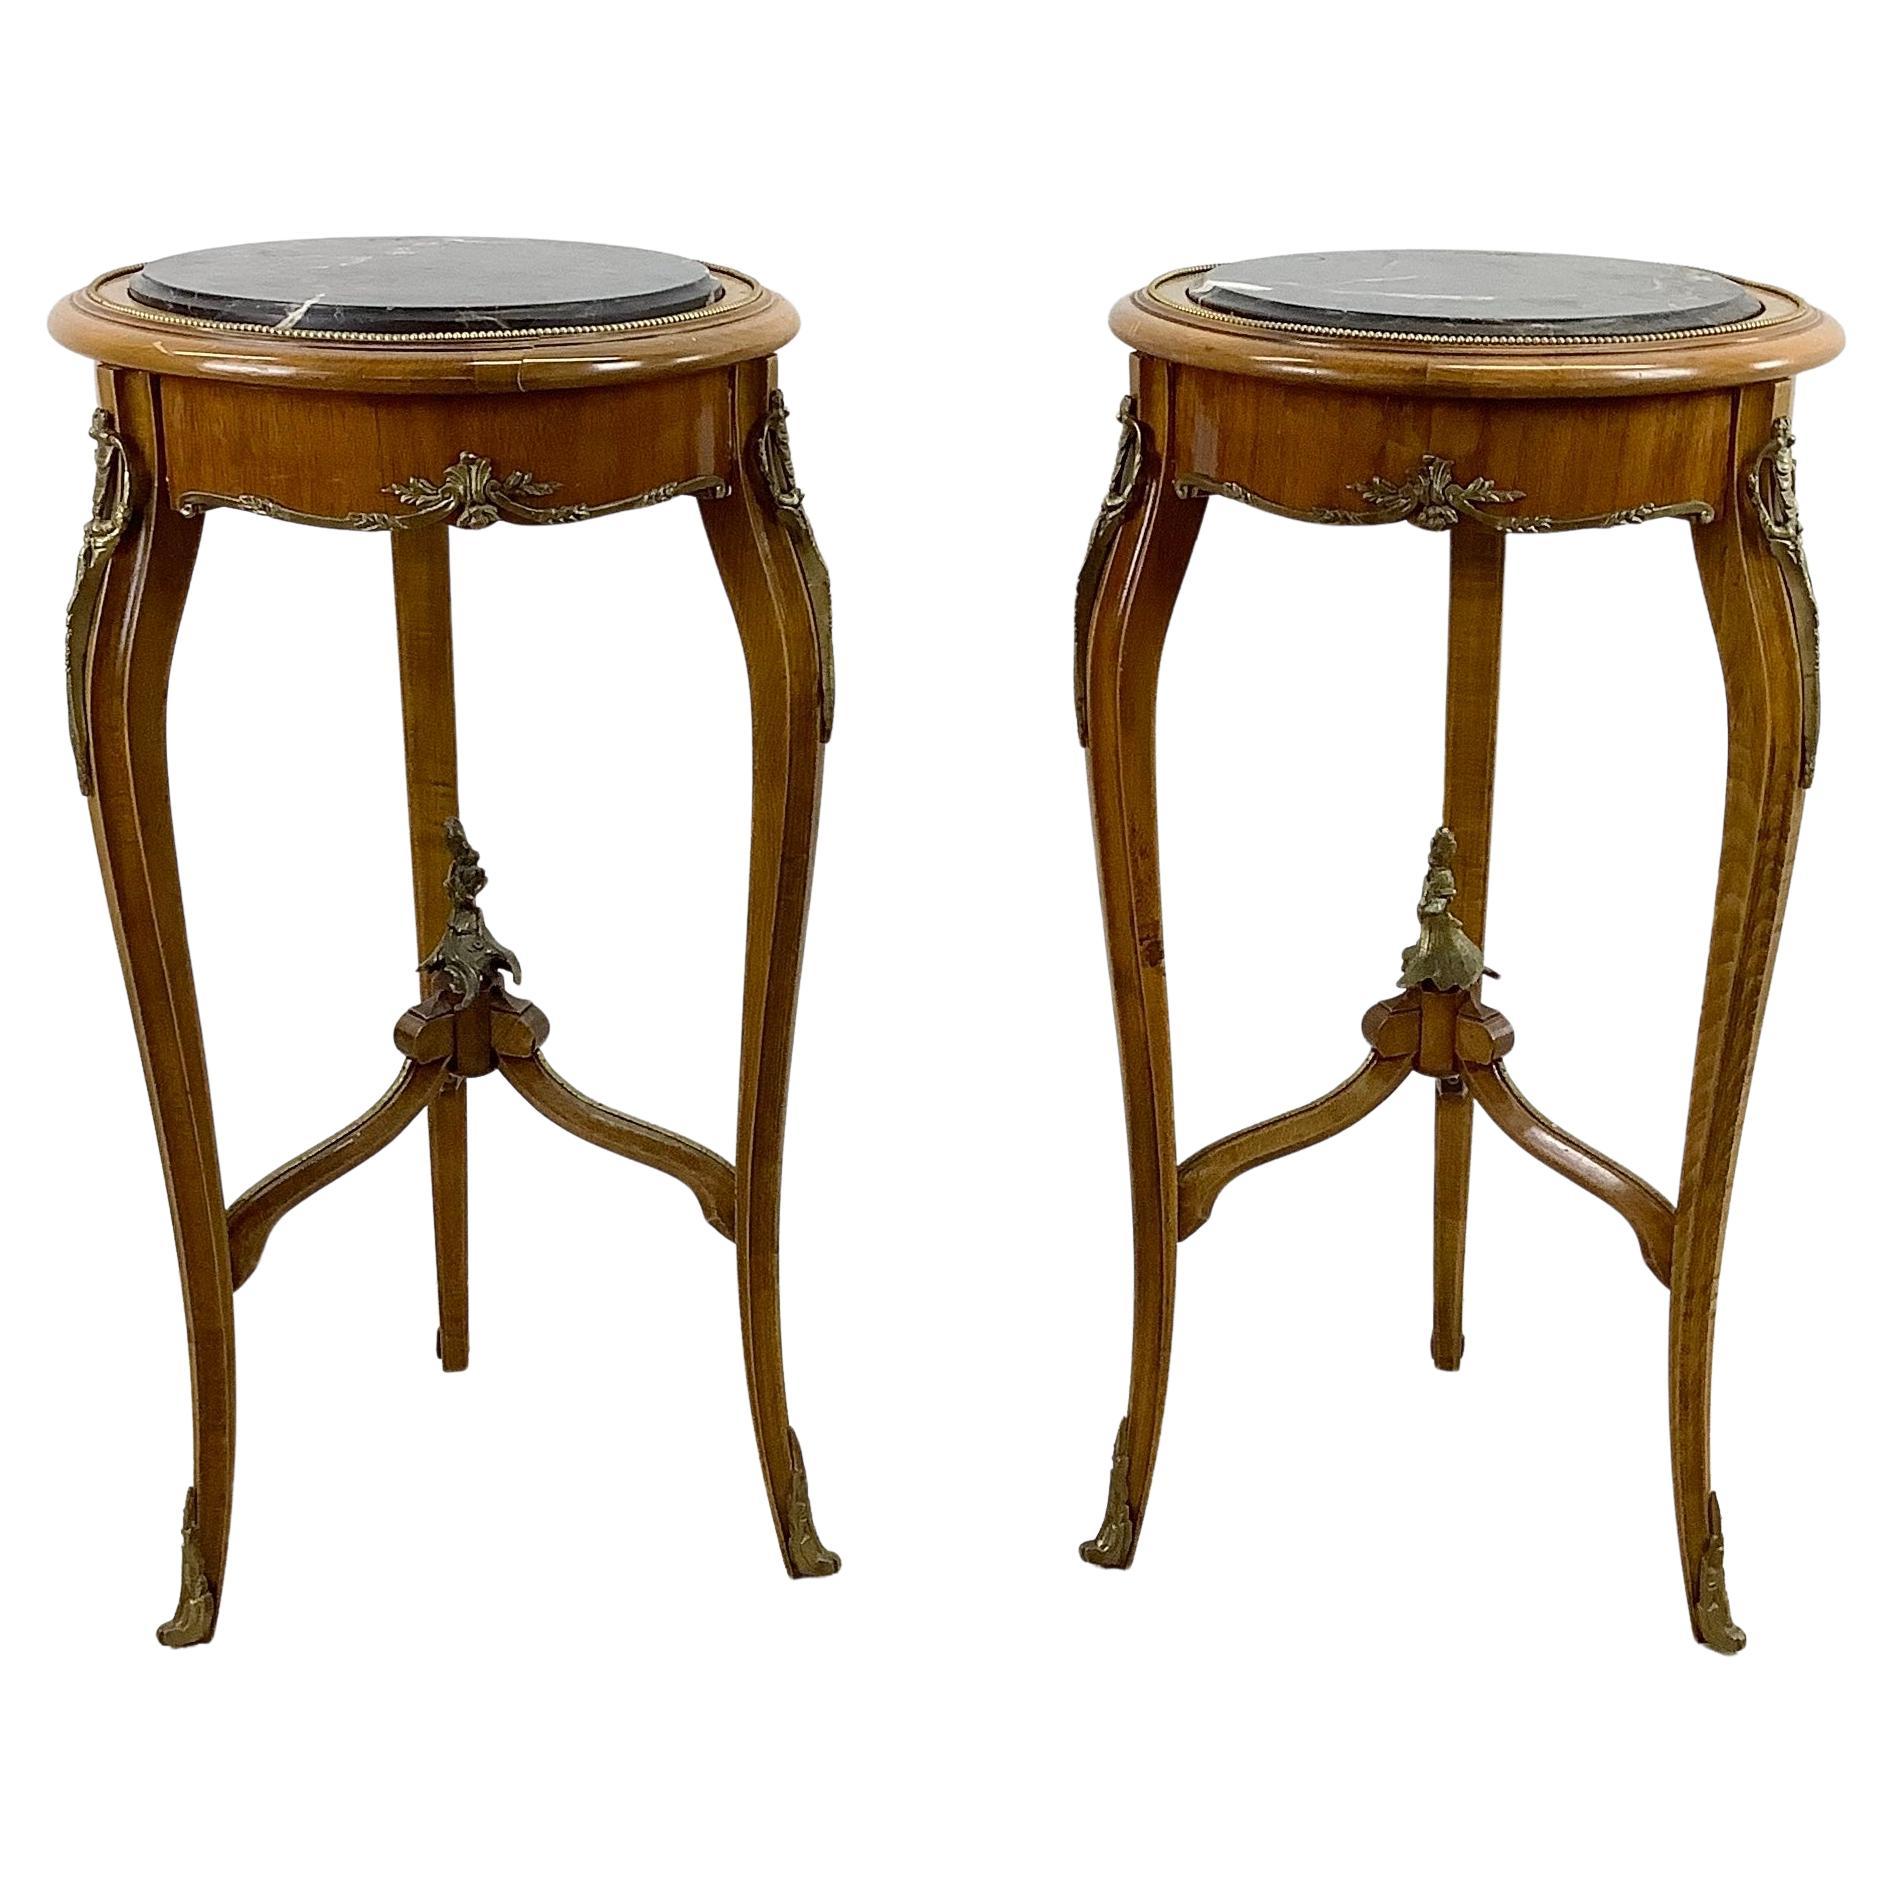 Vintage Louis XV Style Stone Top End Tables -a Pair